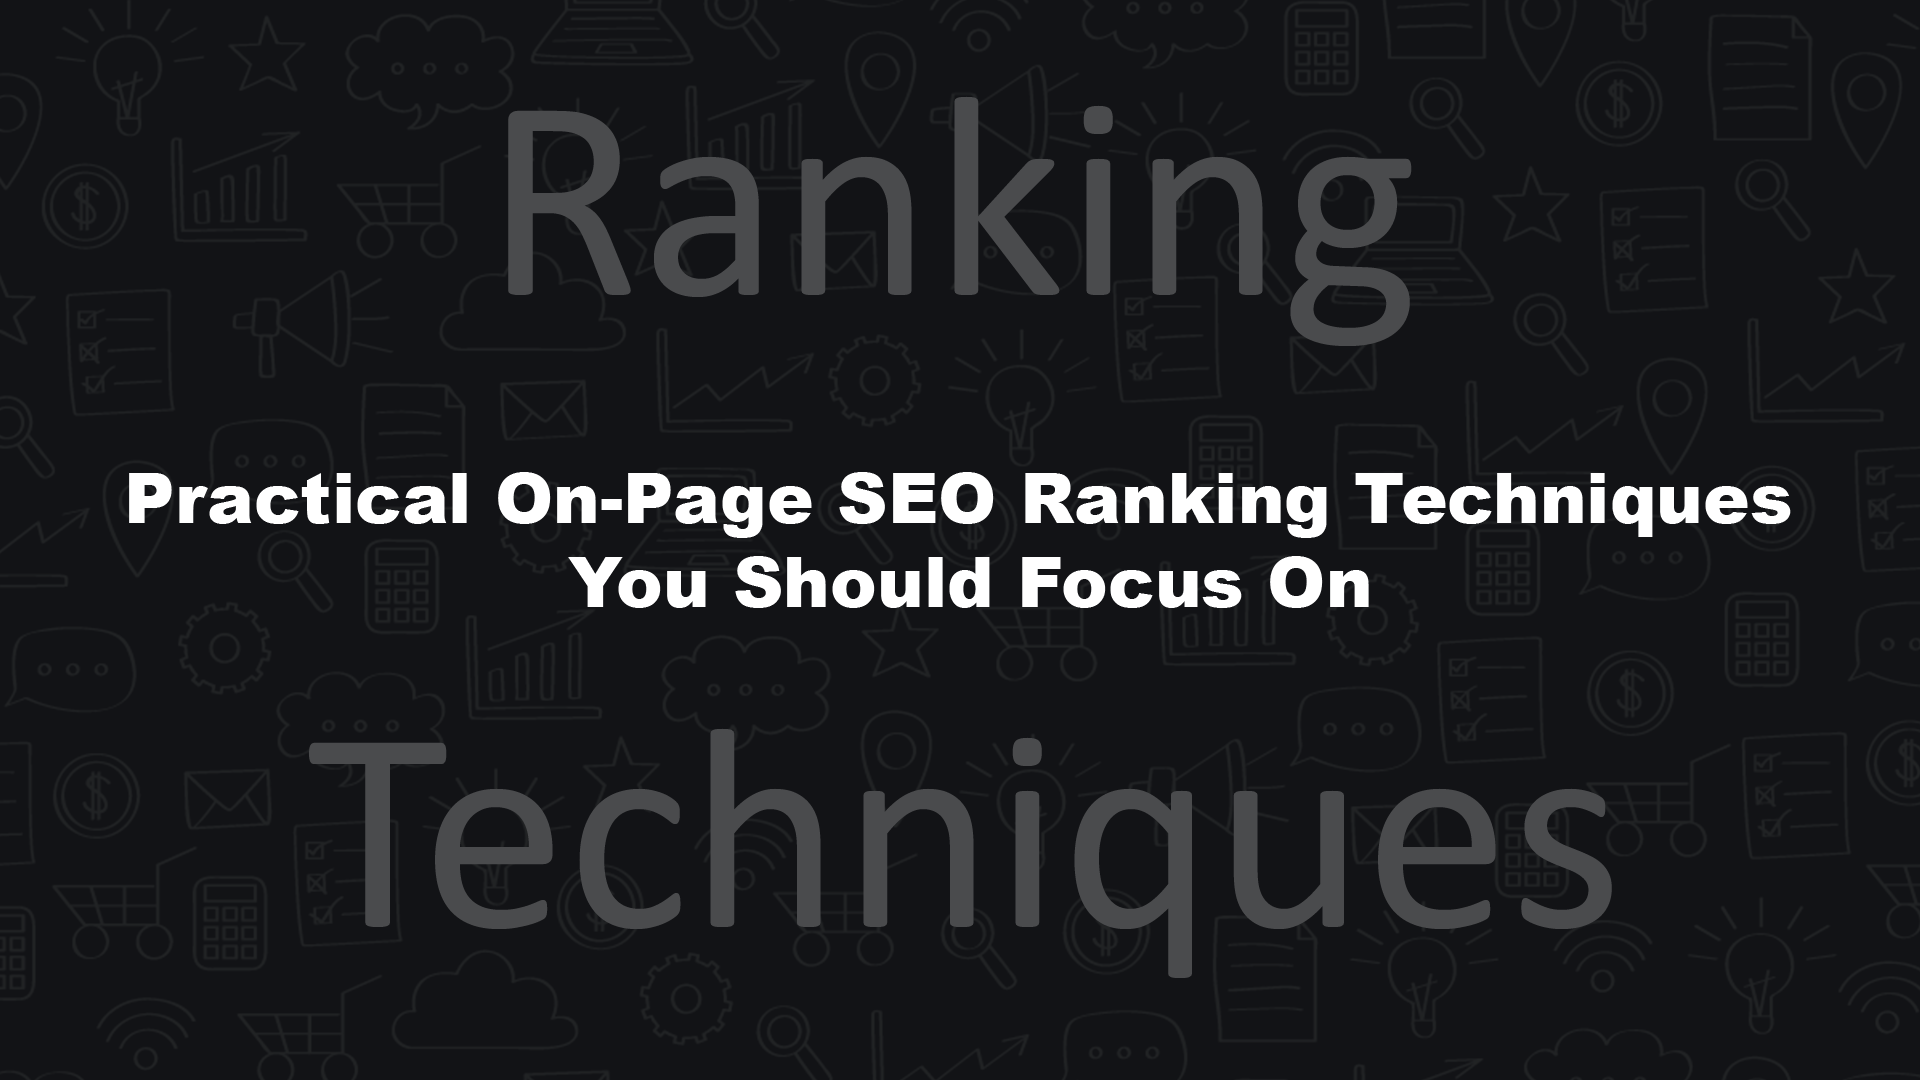 On-Page SEO Ranking Techniques You Should Focus On